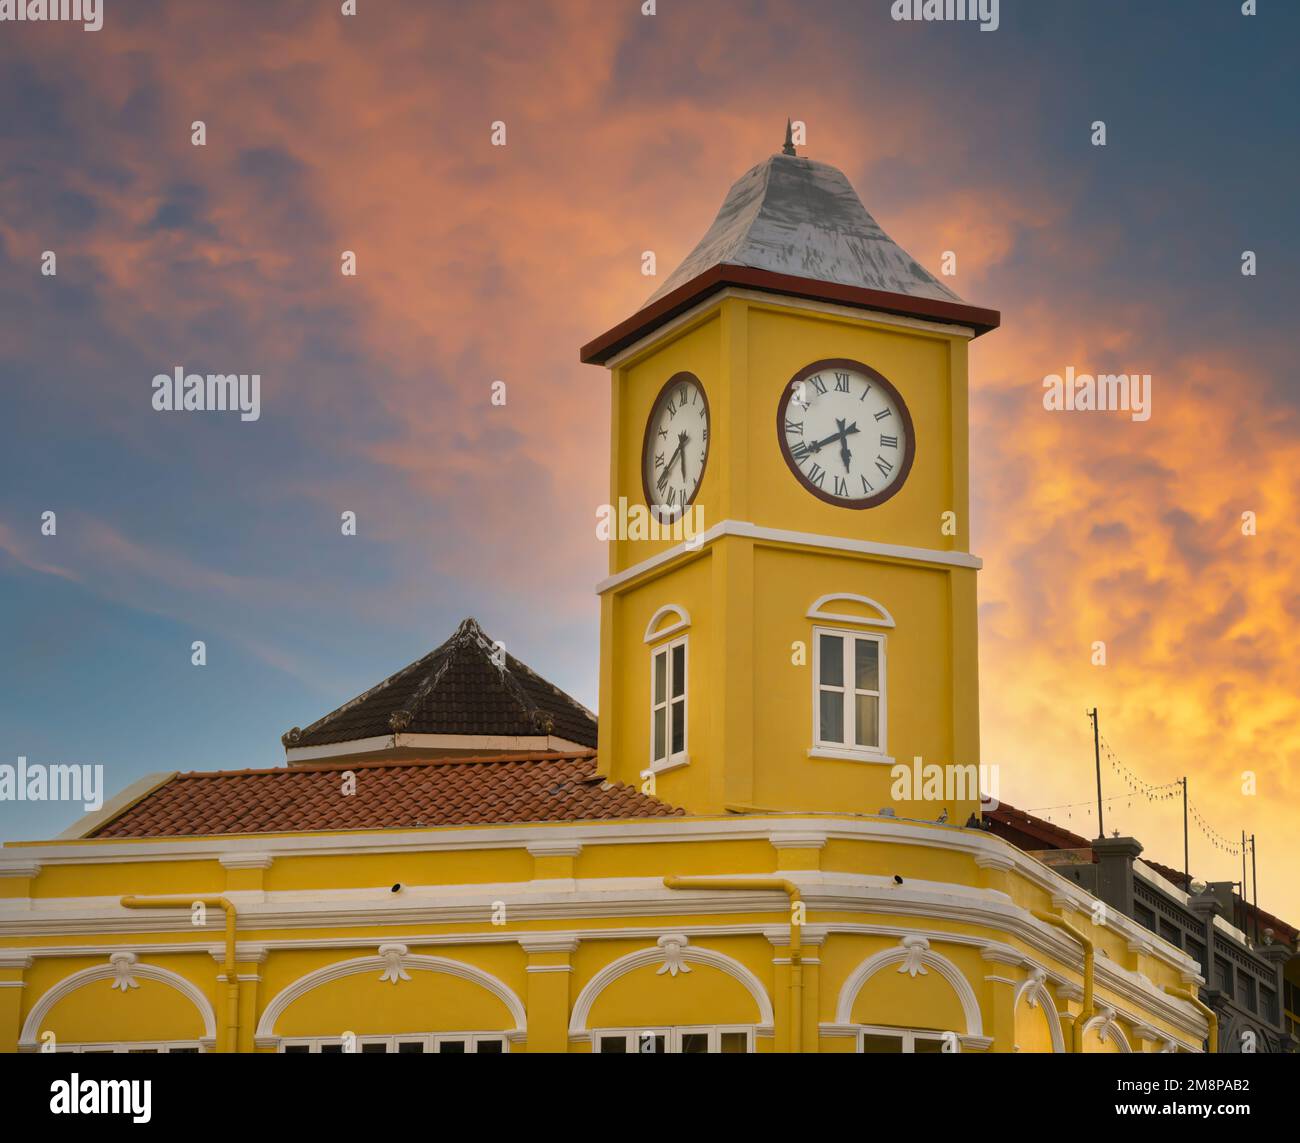 Phuket old town. Famous old clock tower at sunset time. Sino-Portuguese Architecture. Top travel destinations in Thailand Stock Photo